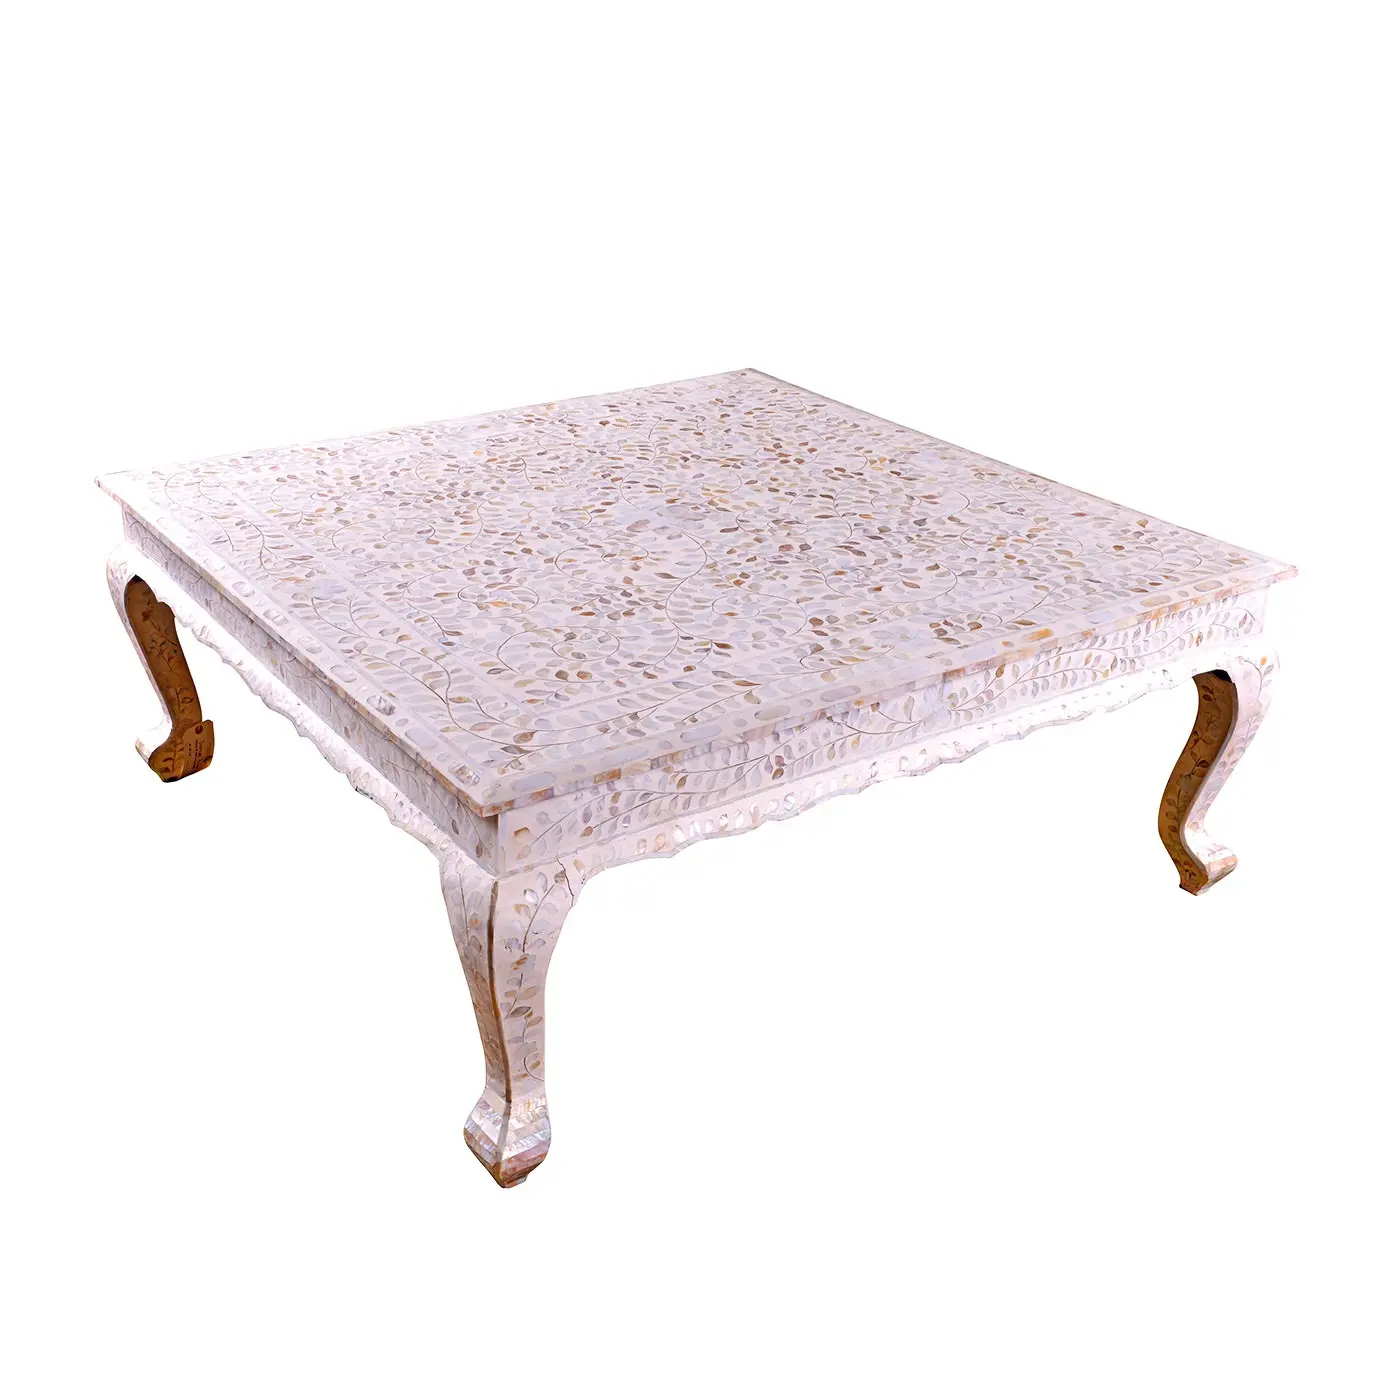 Luxury Mother of Pearl Inlay Round Coffee Table for Living Room Decoration Customized Design in HNH Craft Factory